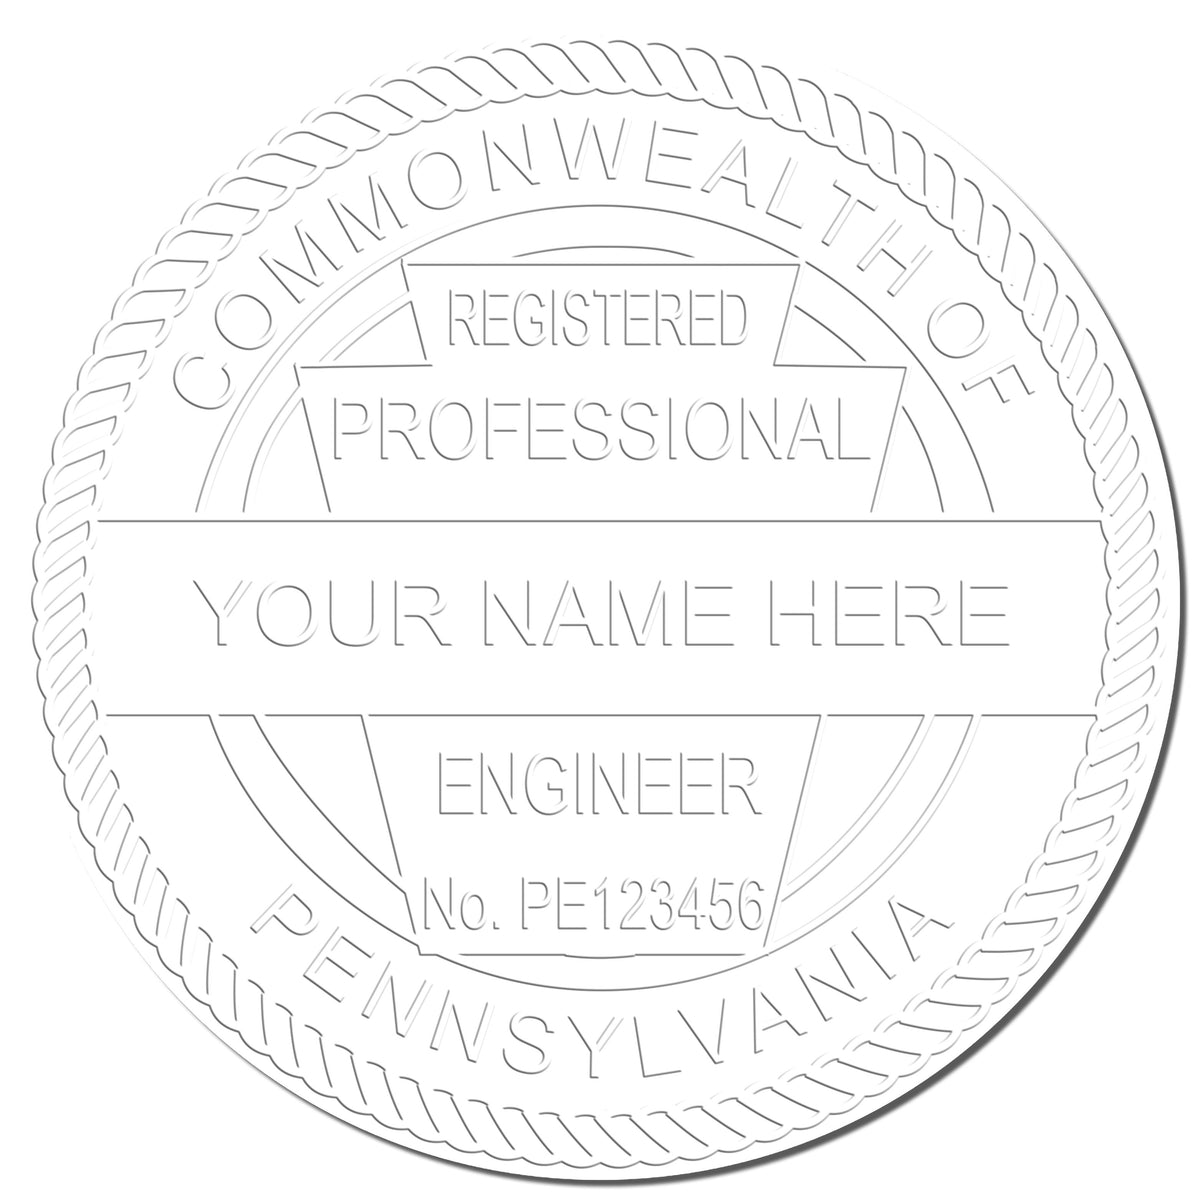 This paper is stamped with a sample imprint of the State of Pennsylvania Extended Long Reach Engineer Seal, signifying its quality and reliability.